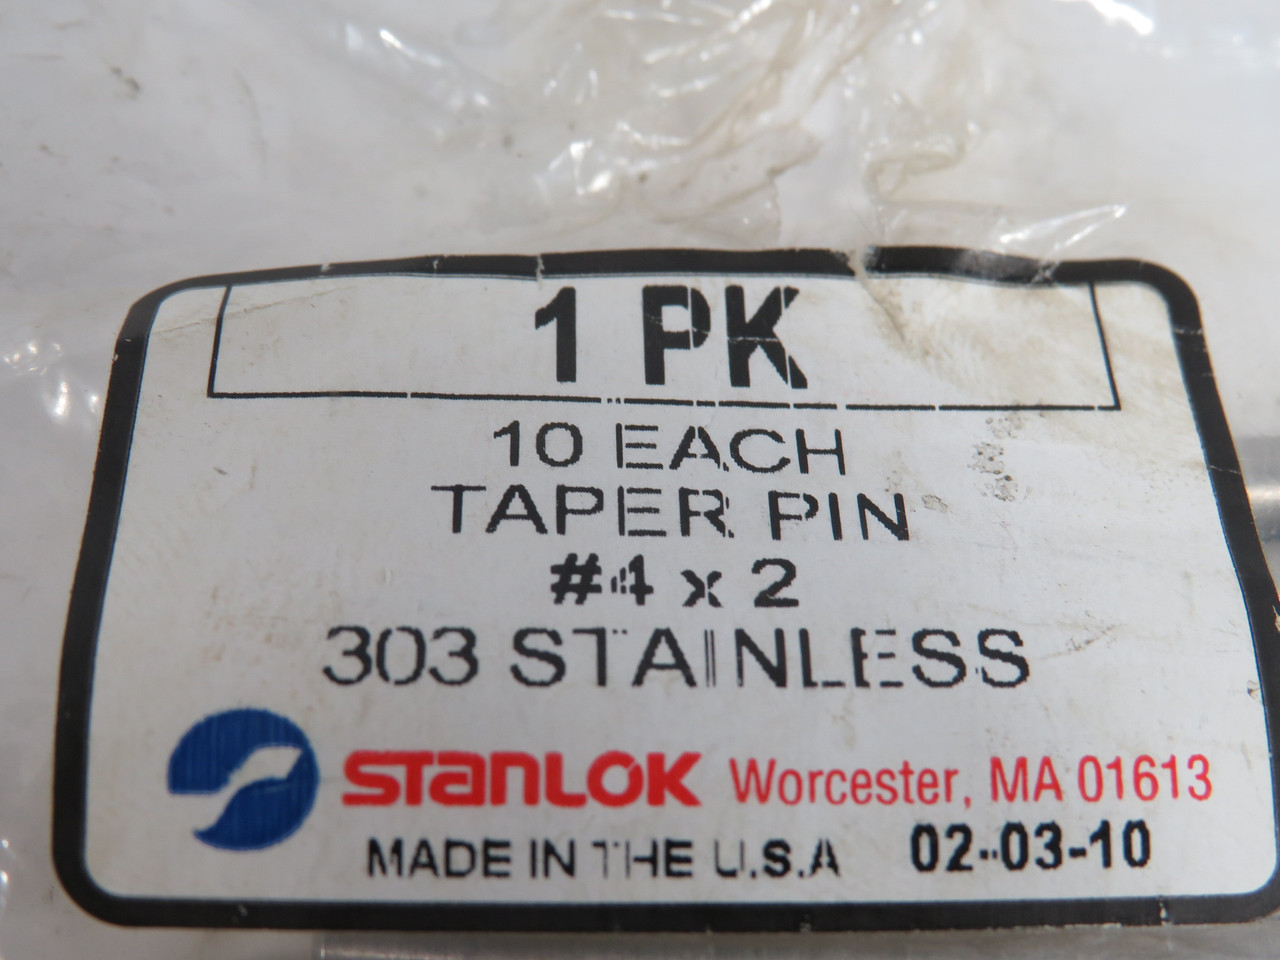 Stanlok Stainless Steel Taper Pin #4 x 2" *Open Bag* 5-Pack NWB